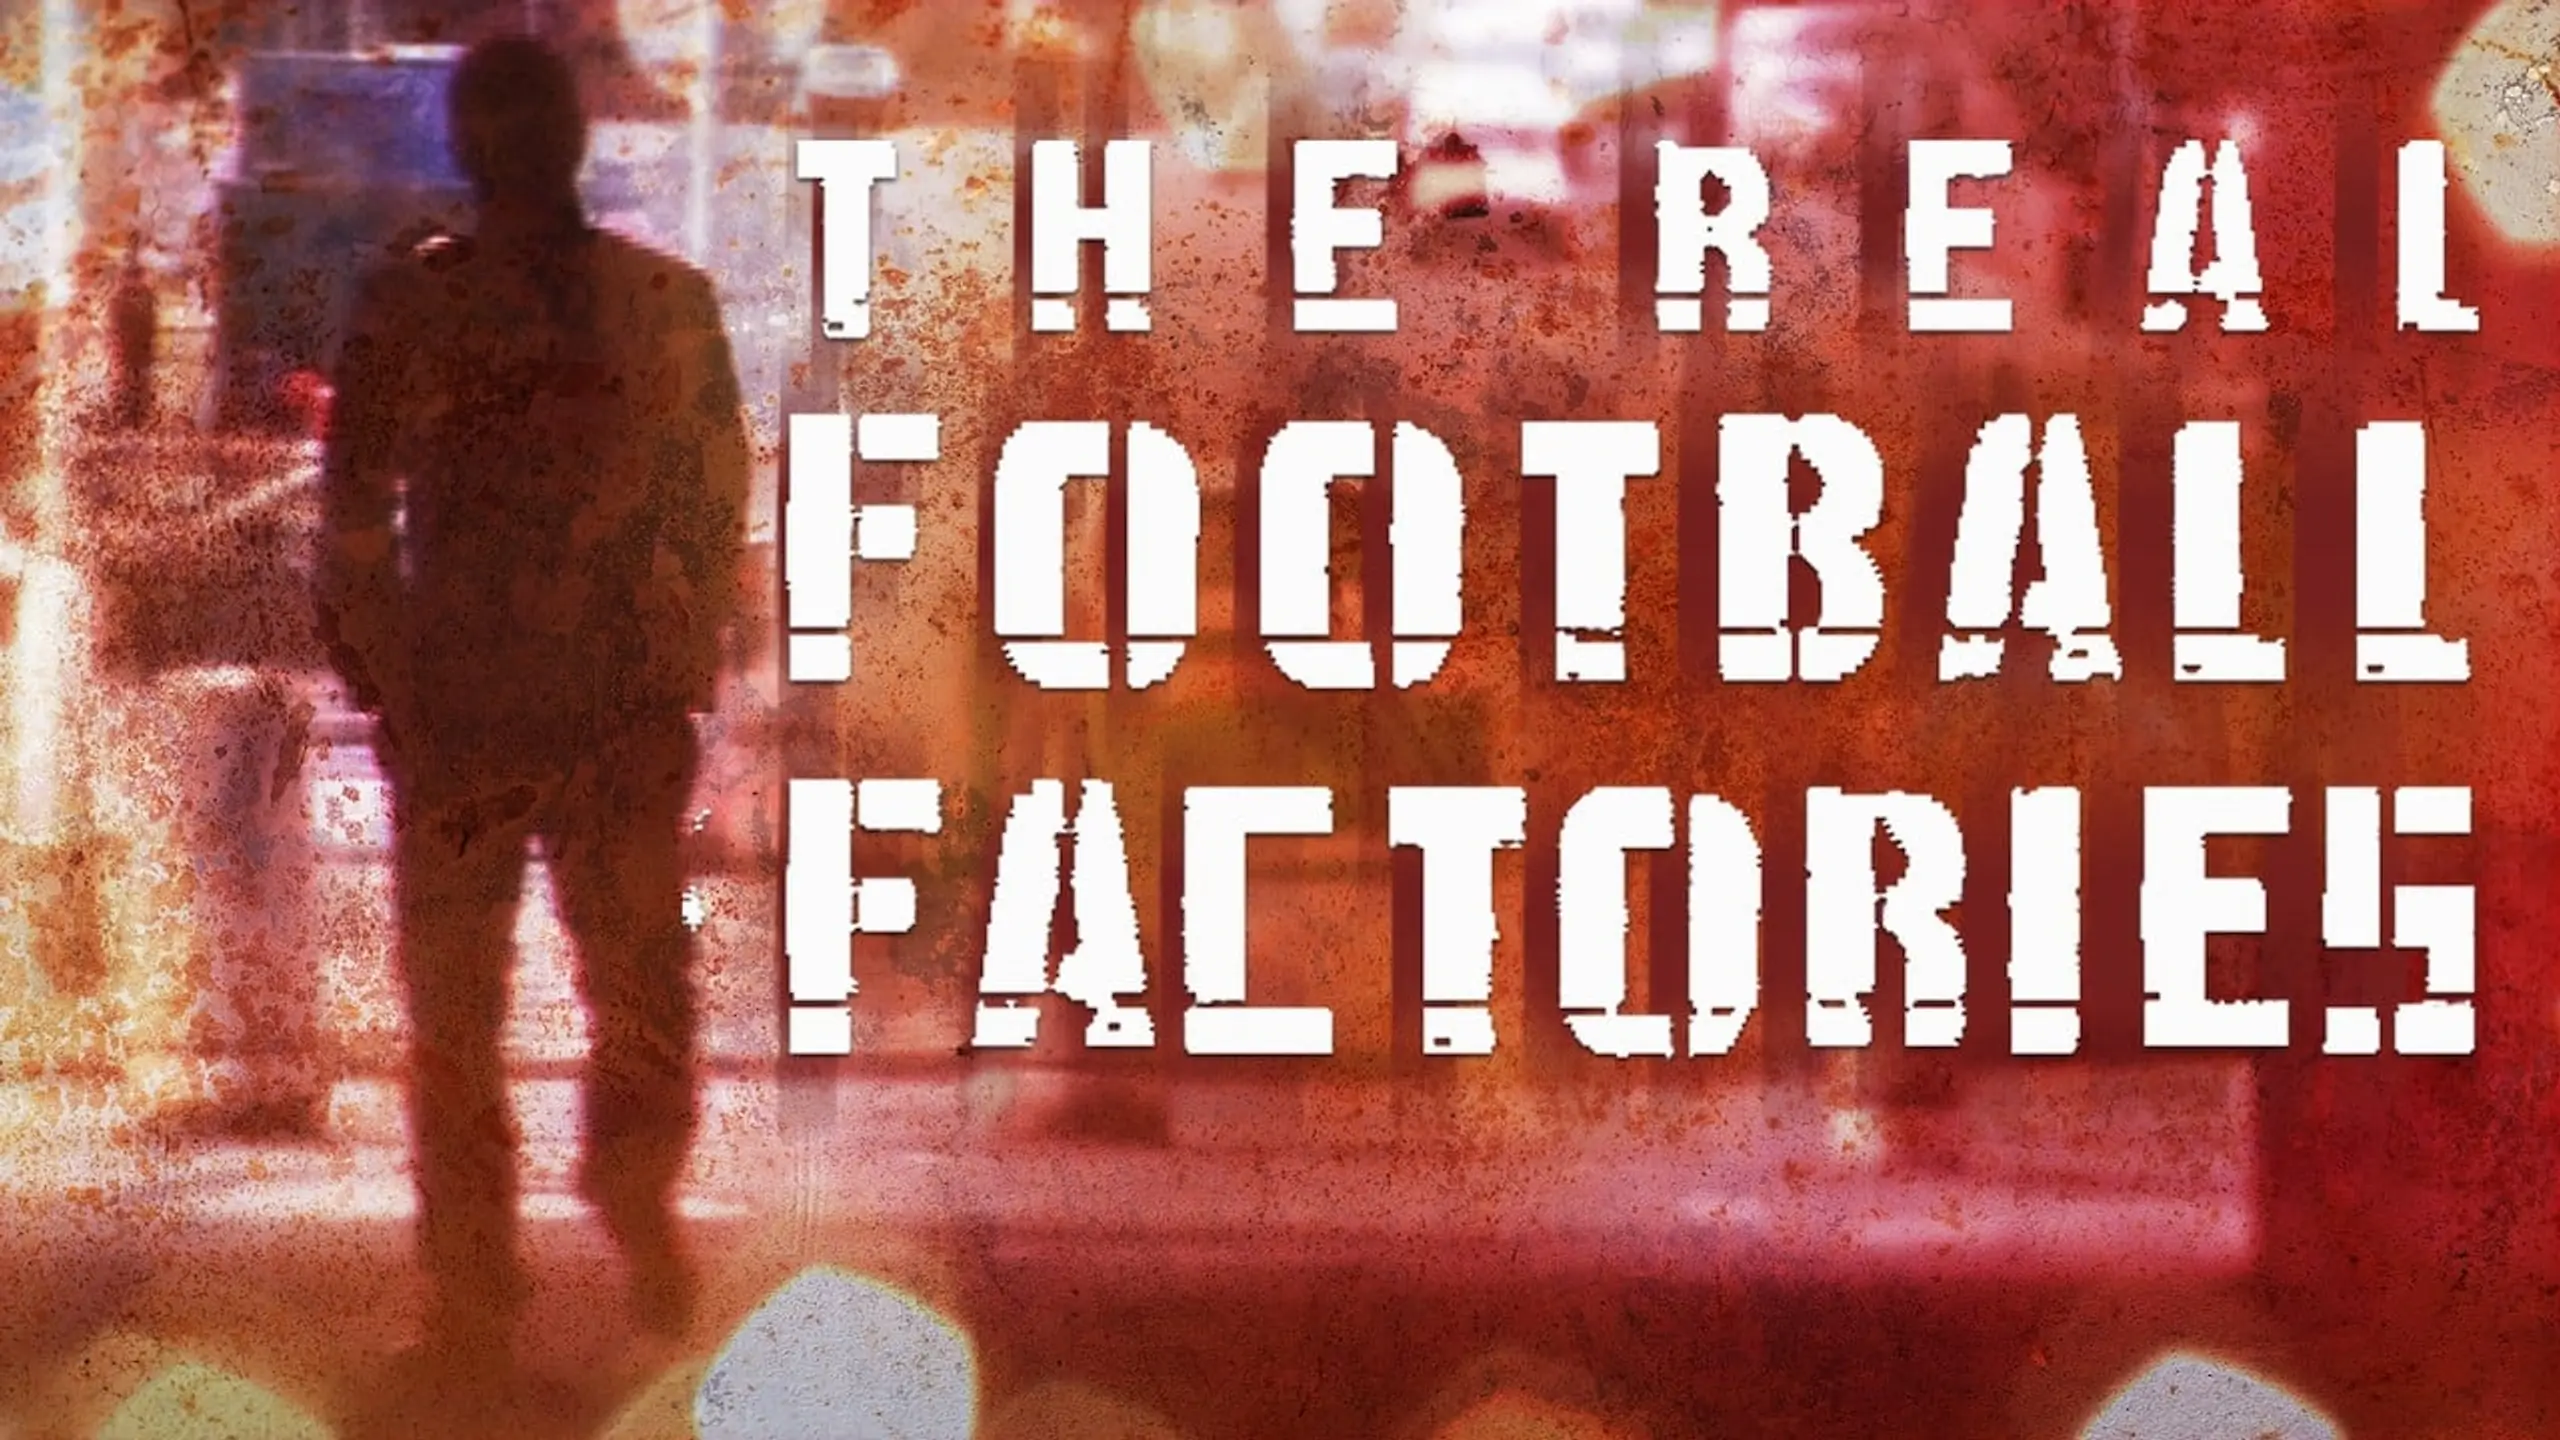 The Real Football Factories